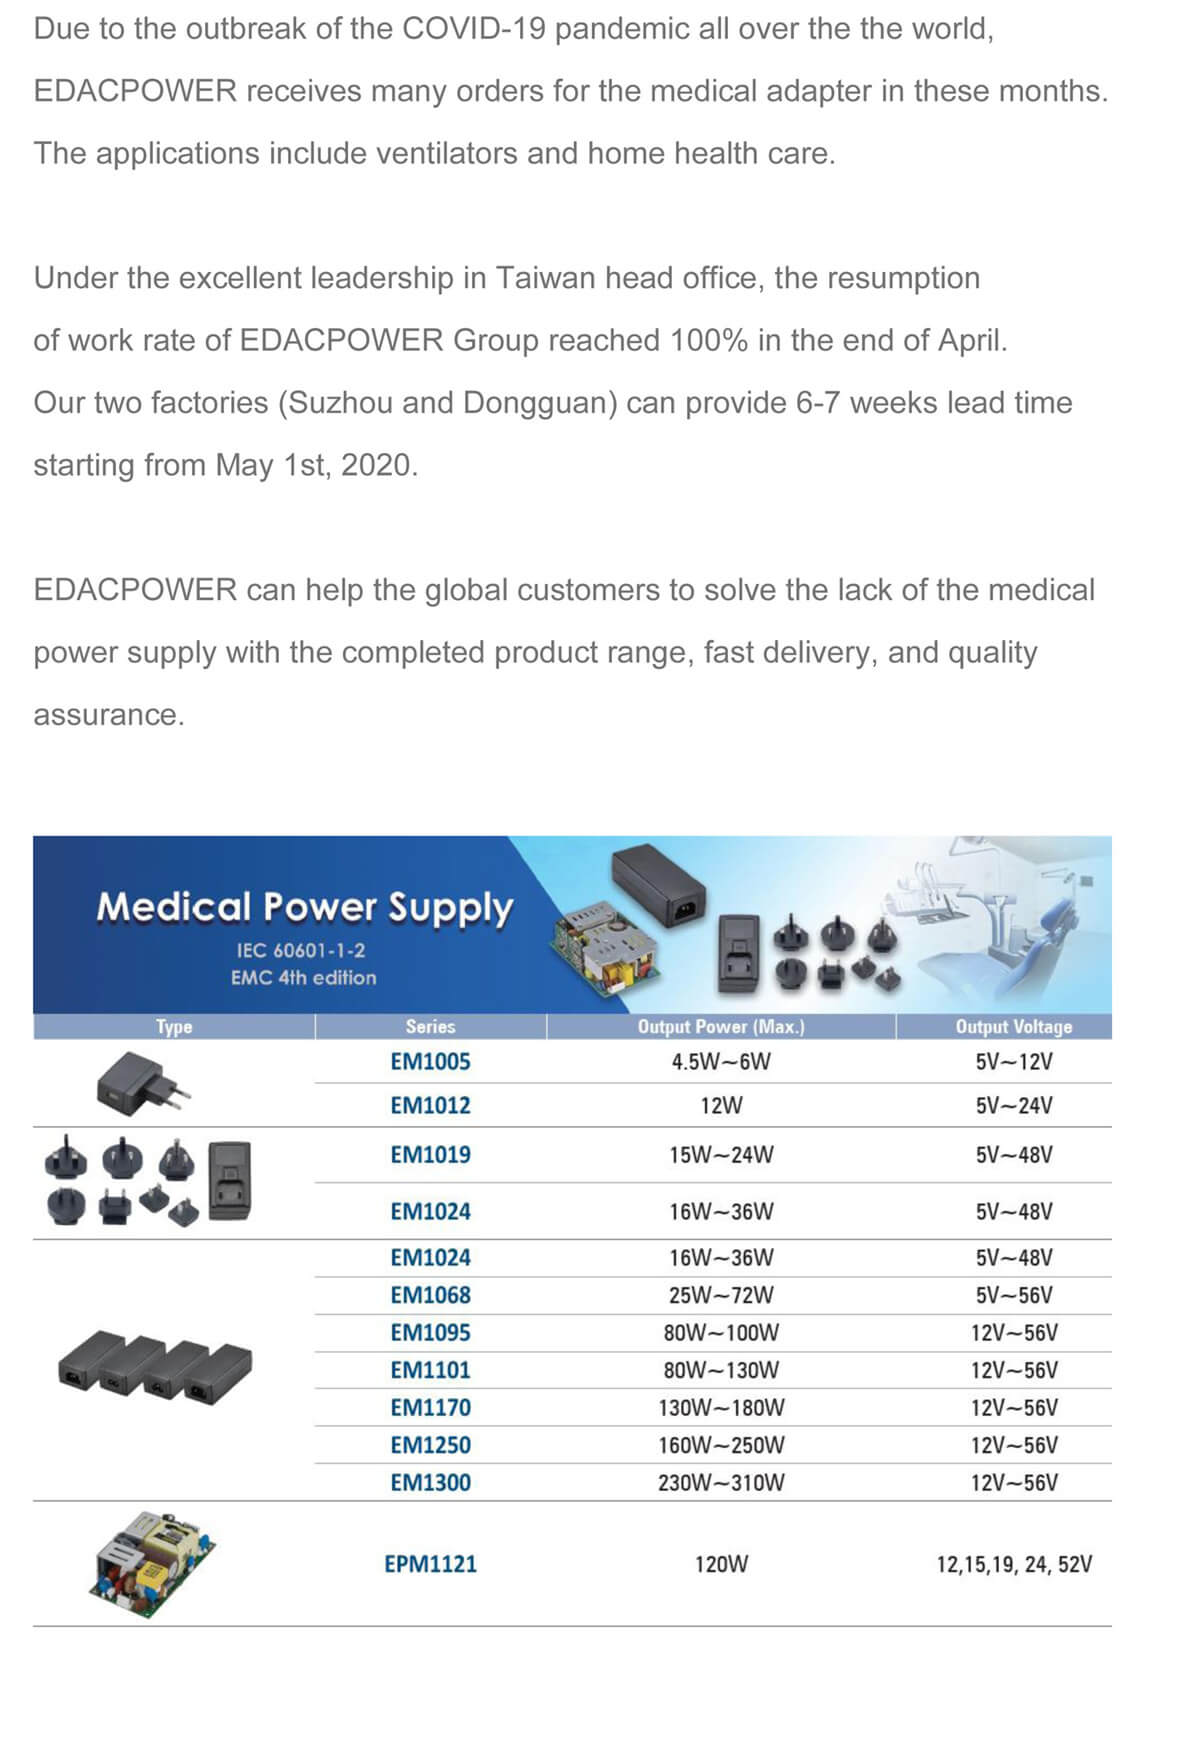 EDACPOWER can help to solve the lack of the medical adapter in 6-7 weeks